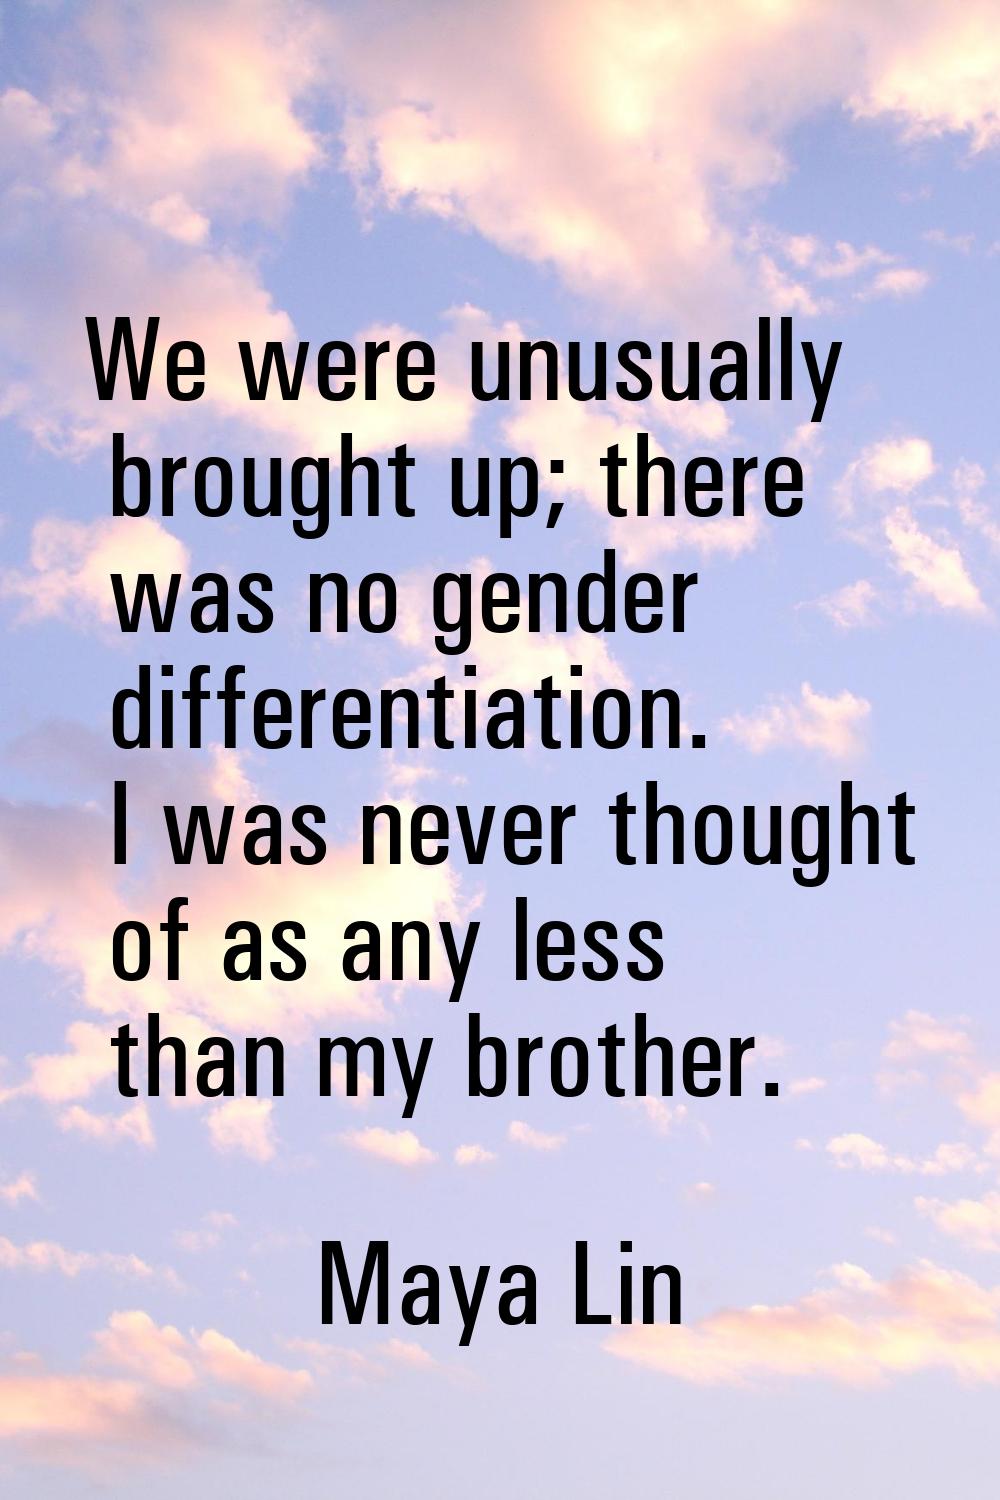 We were unusually brought up; there was no gender differentiation. I was never thought of as any le